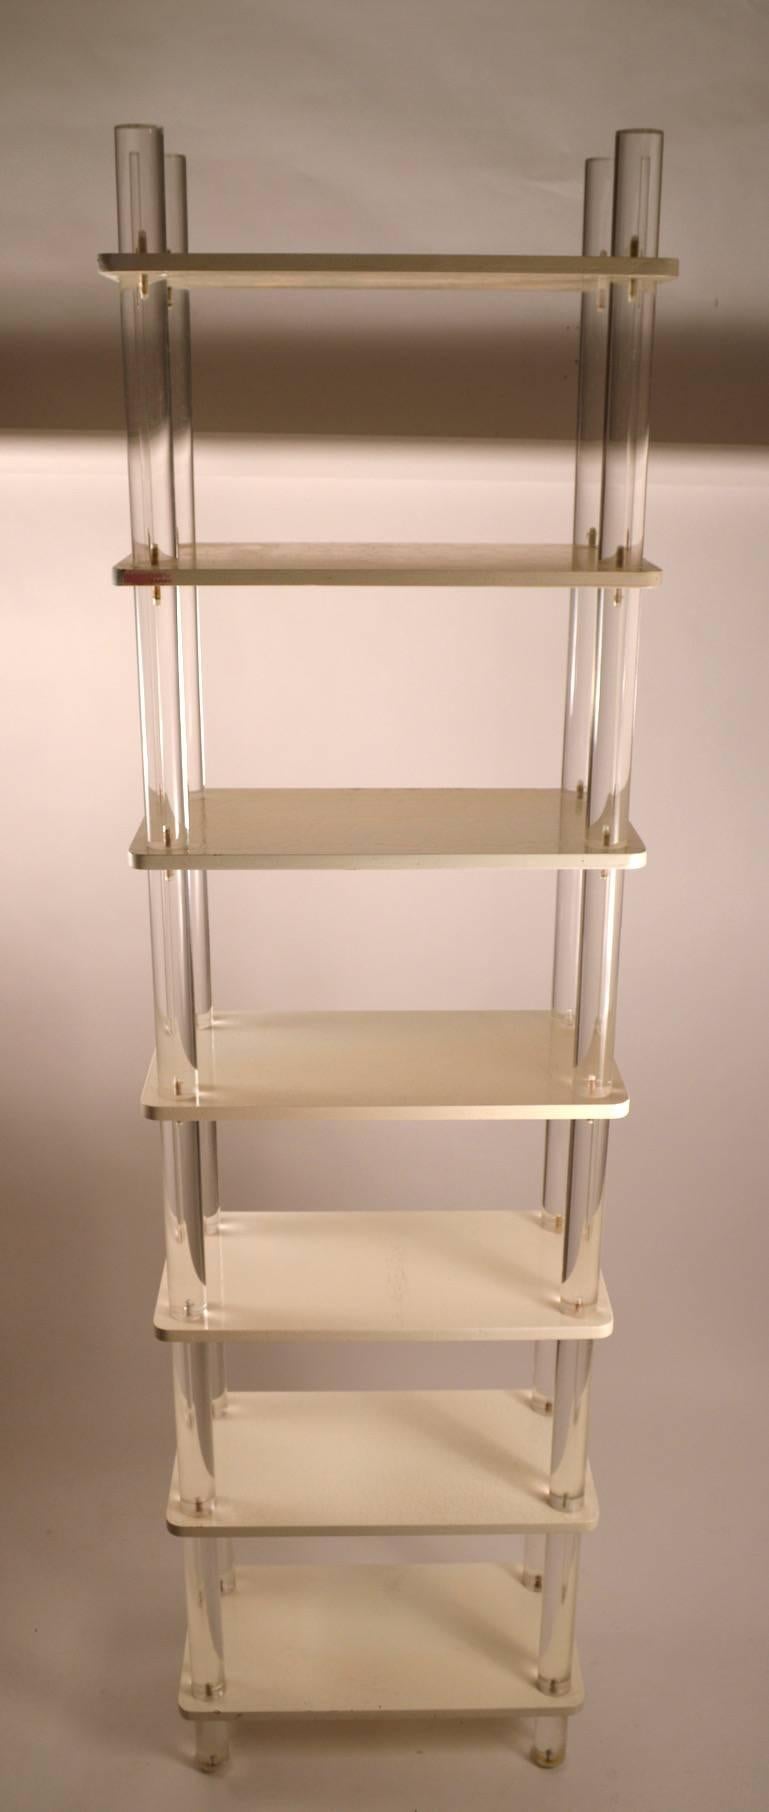 Thick cylindrical vertical elements support white painted wood shelves. Seven shelves approximately 12